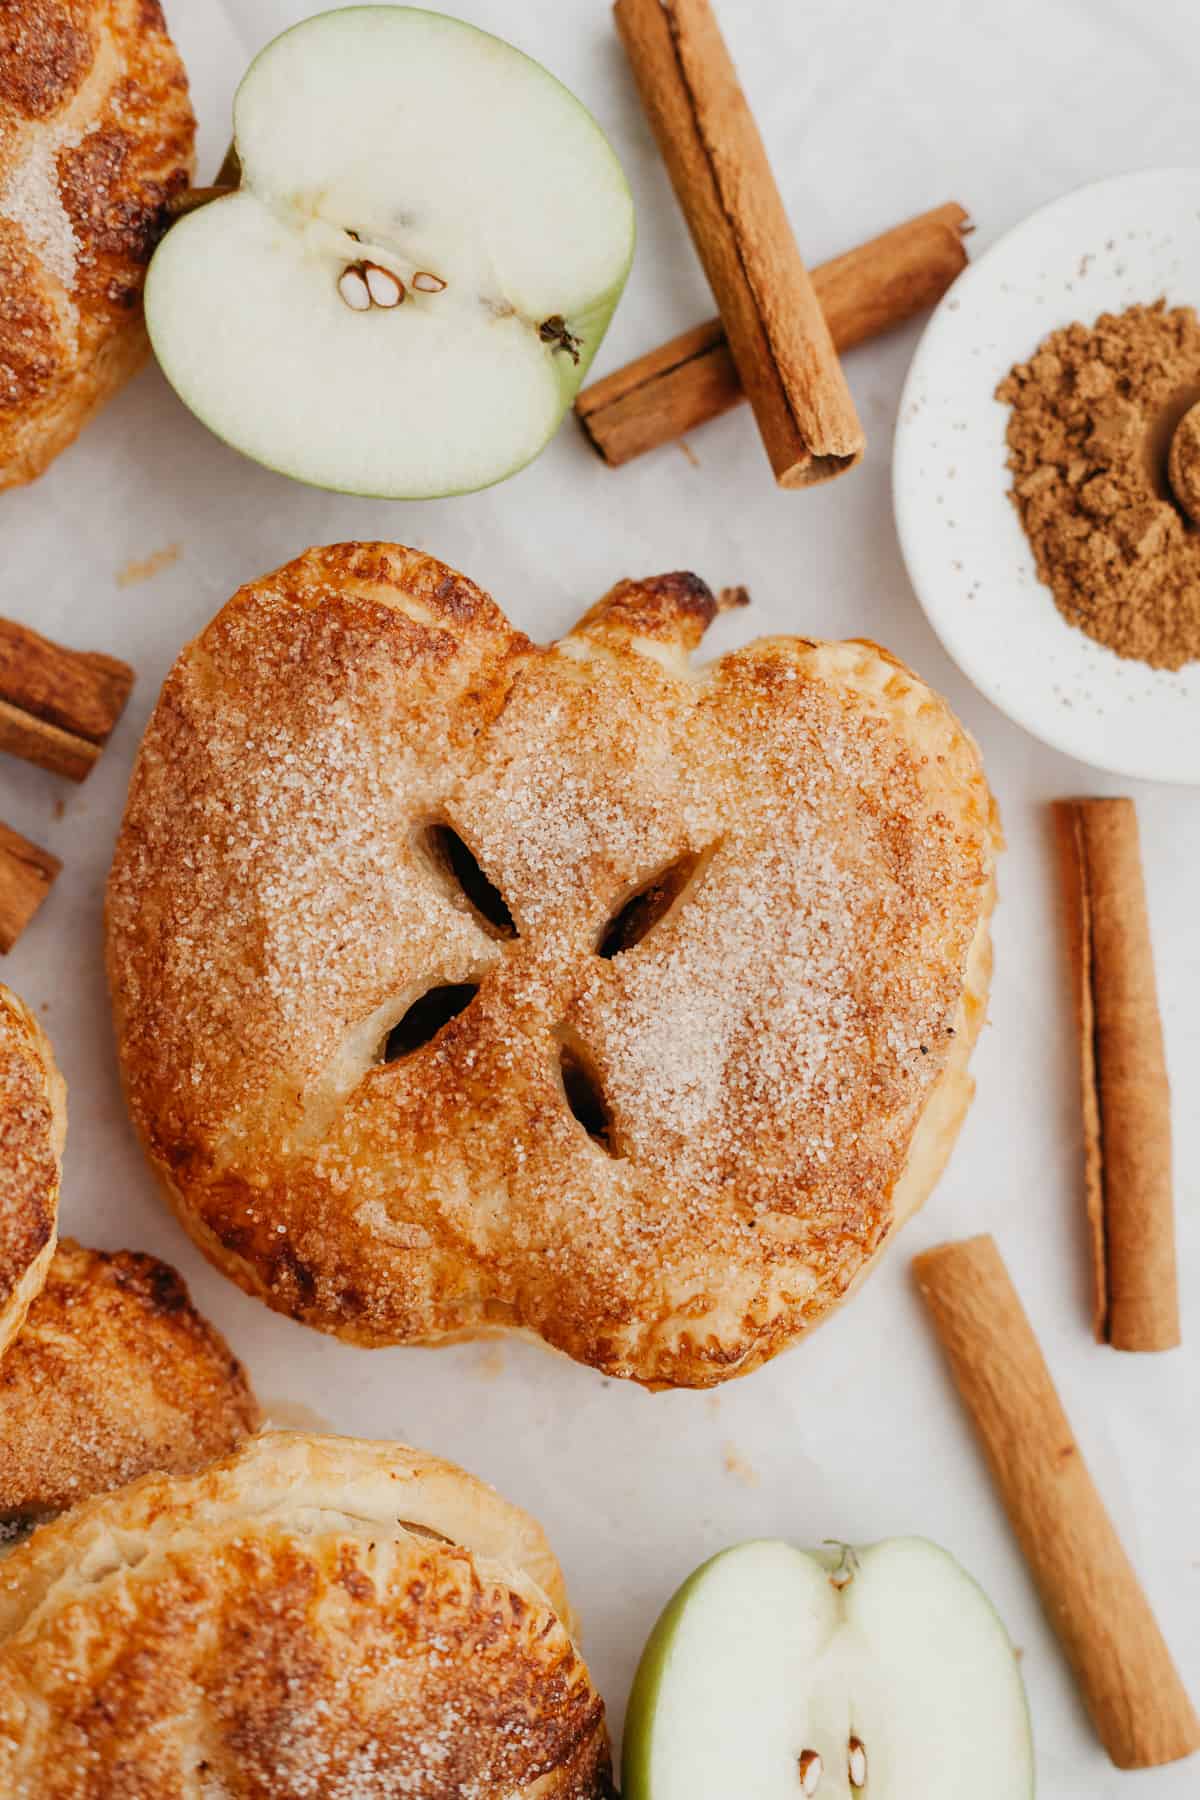 A close up of an apple shaped mini apple pie.